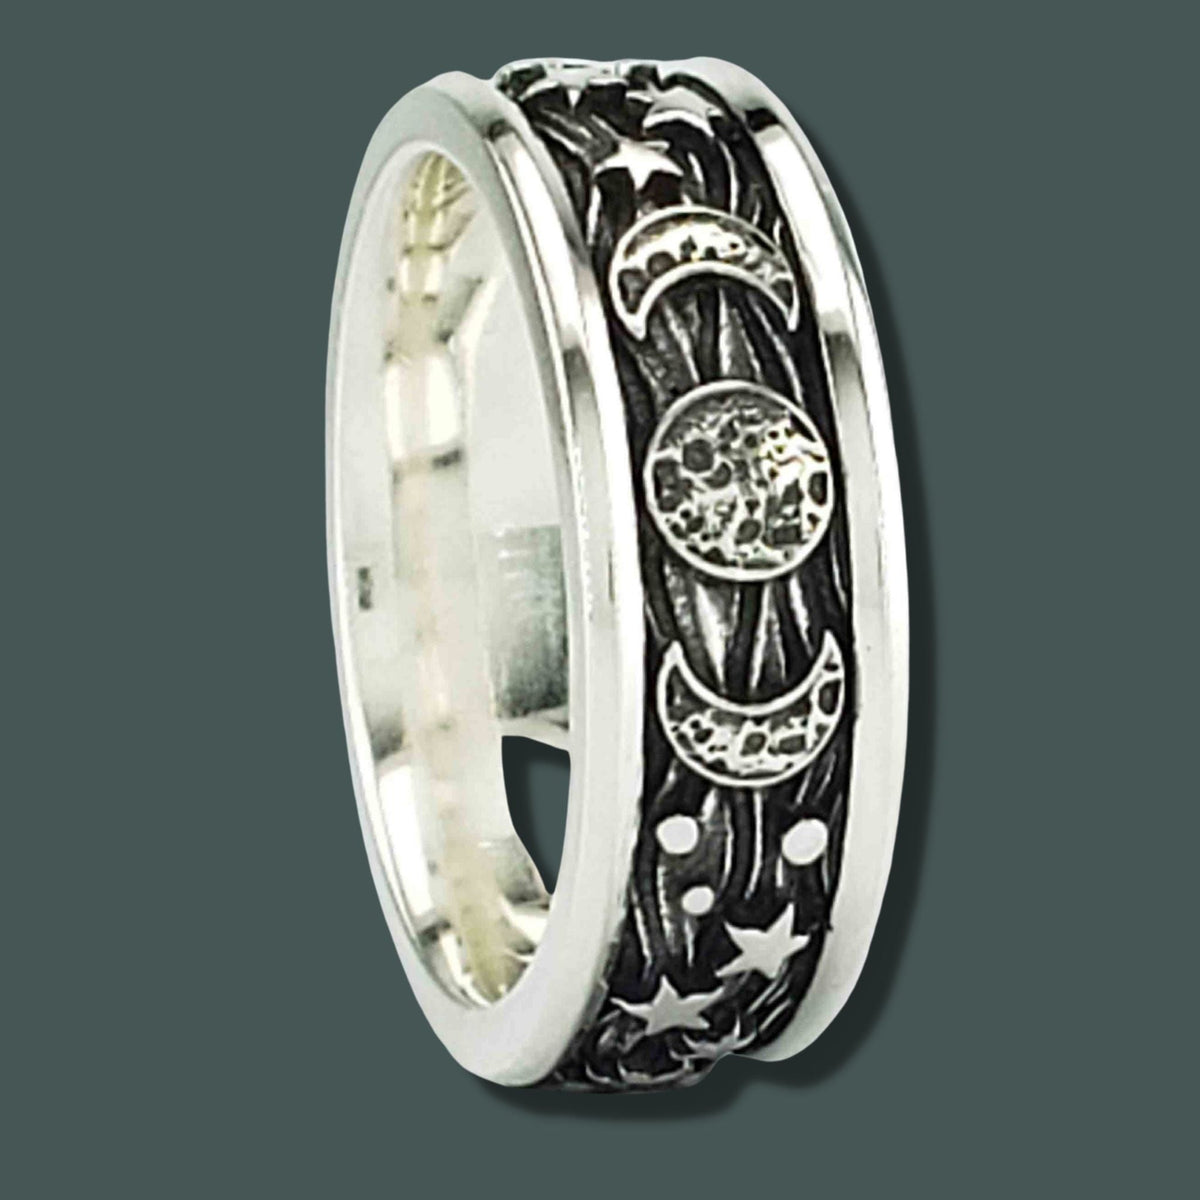 QUEEN OF ASGARD Band Ring - Celestial Jewelry with Planets &amp; Stars in Silver &amp; Silver+10KT Gold